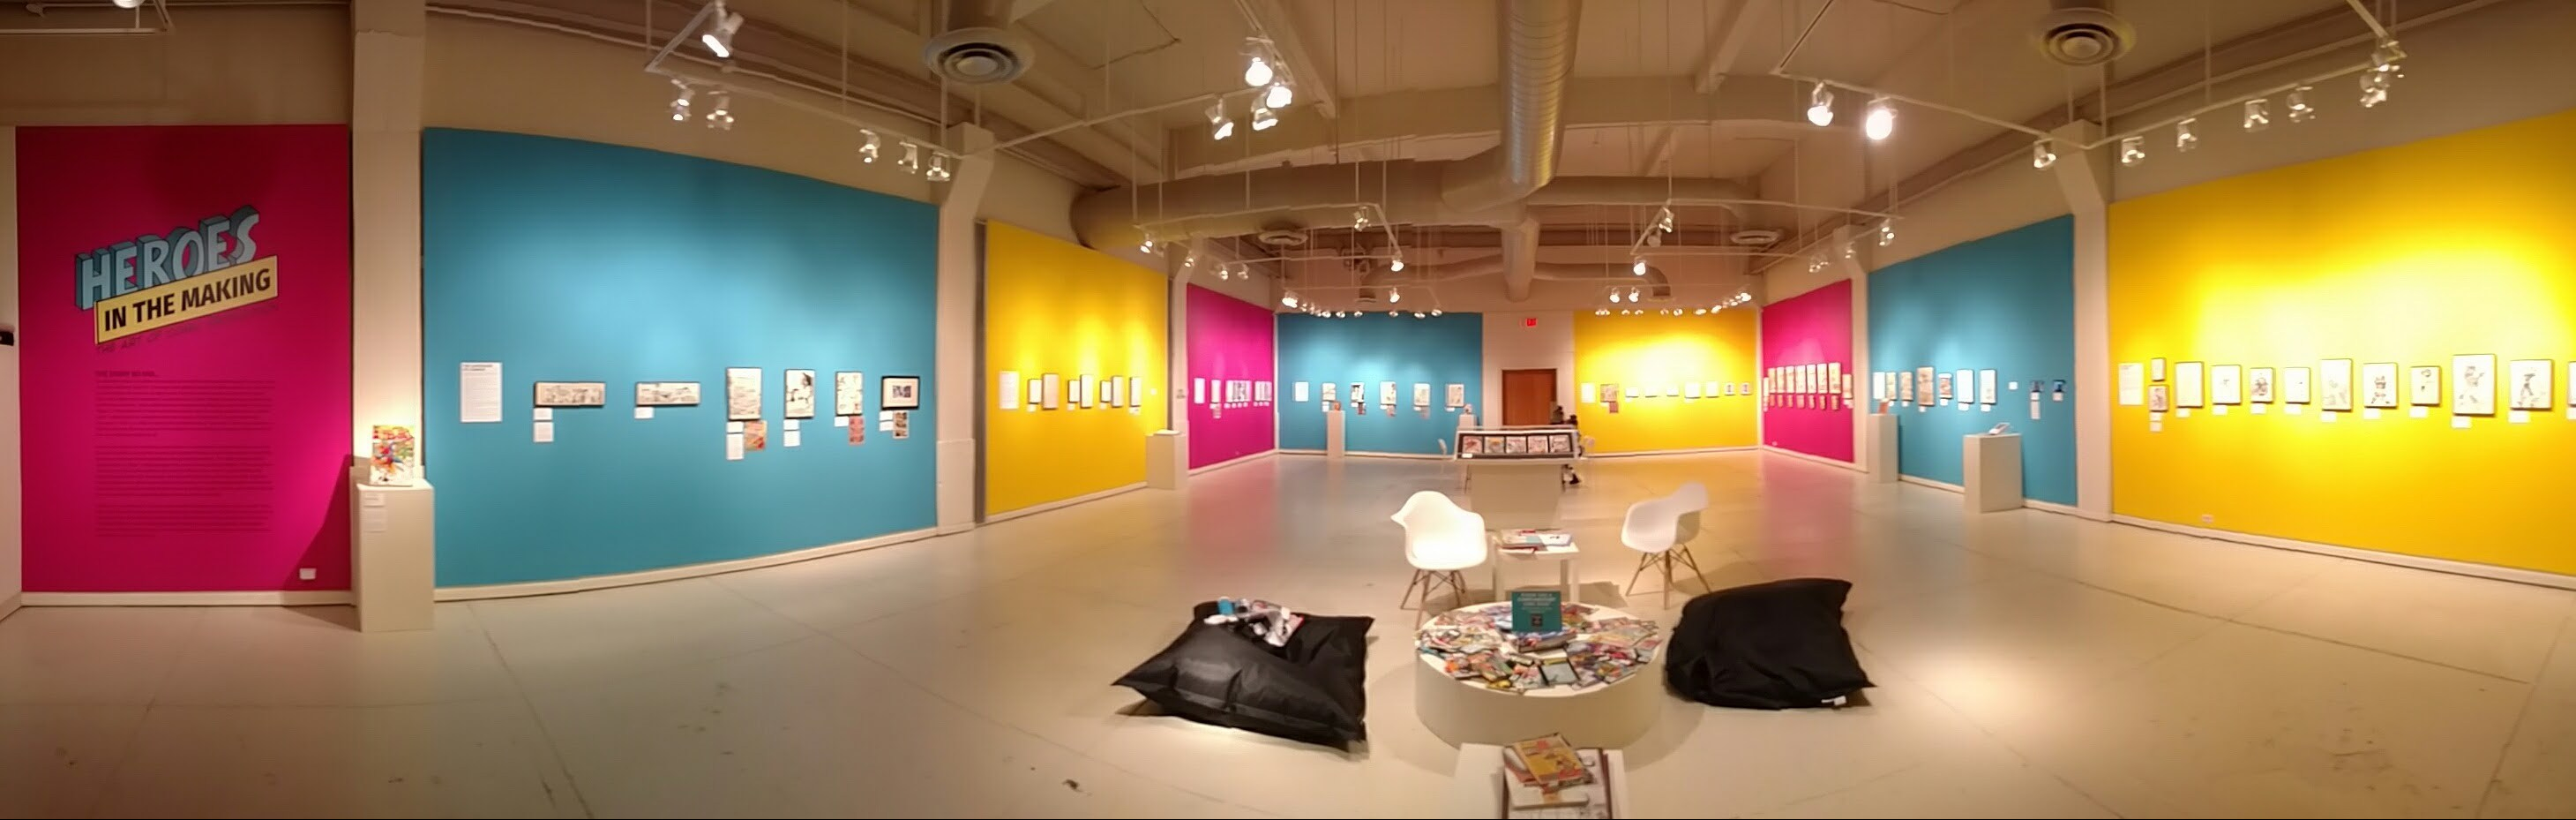 Panoramic View of Heroes in the Making Exhibition